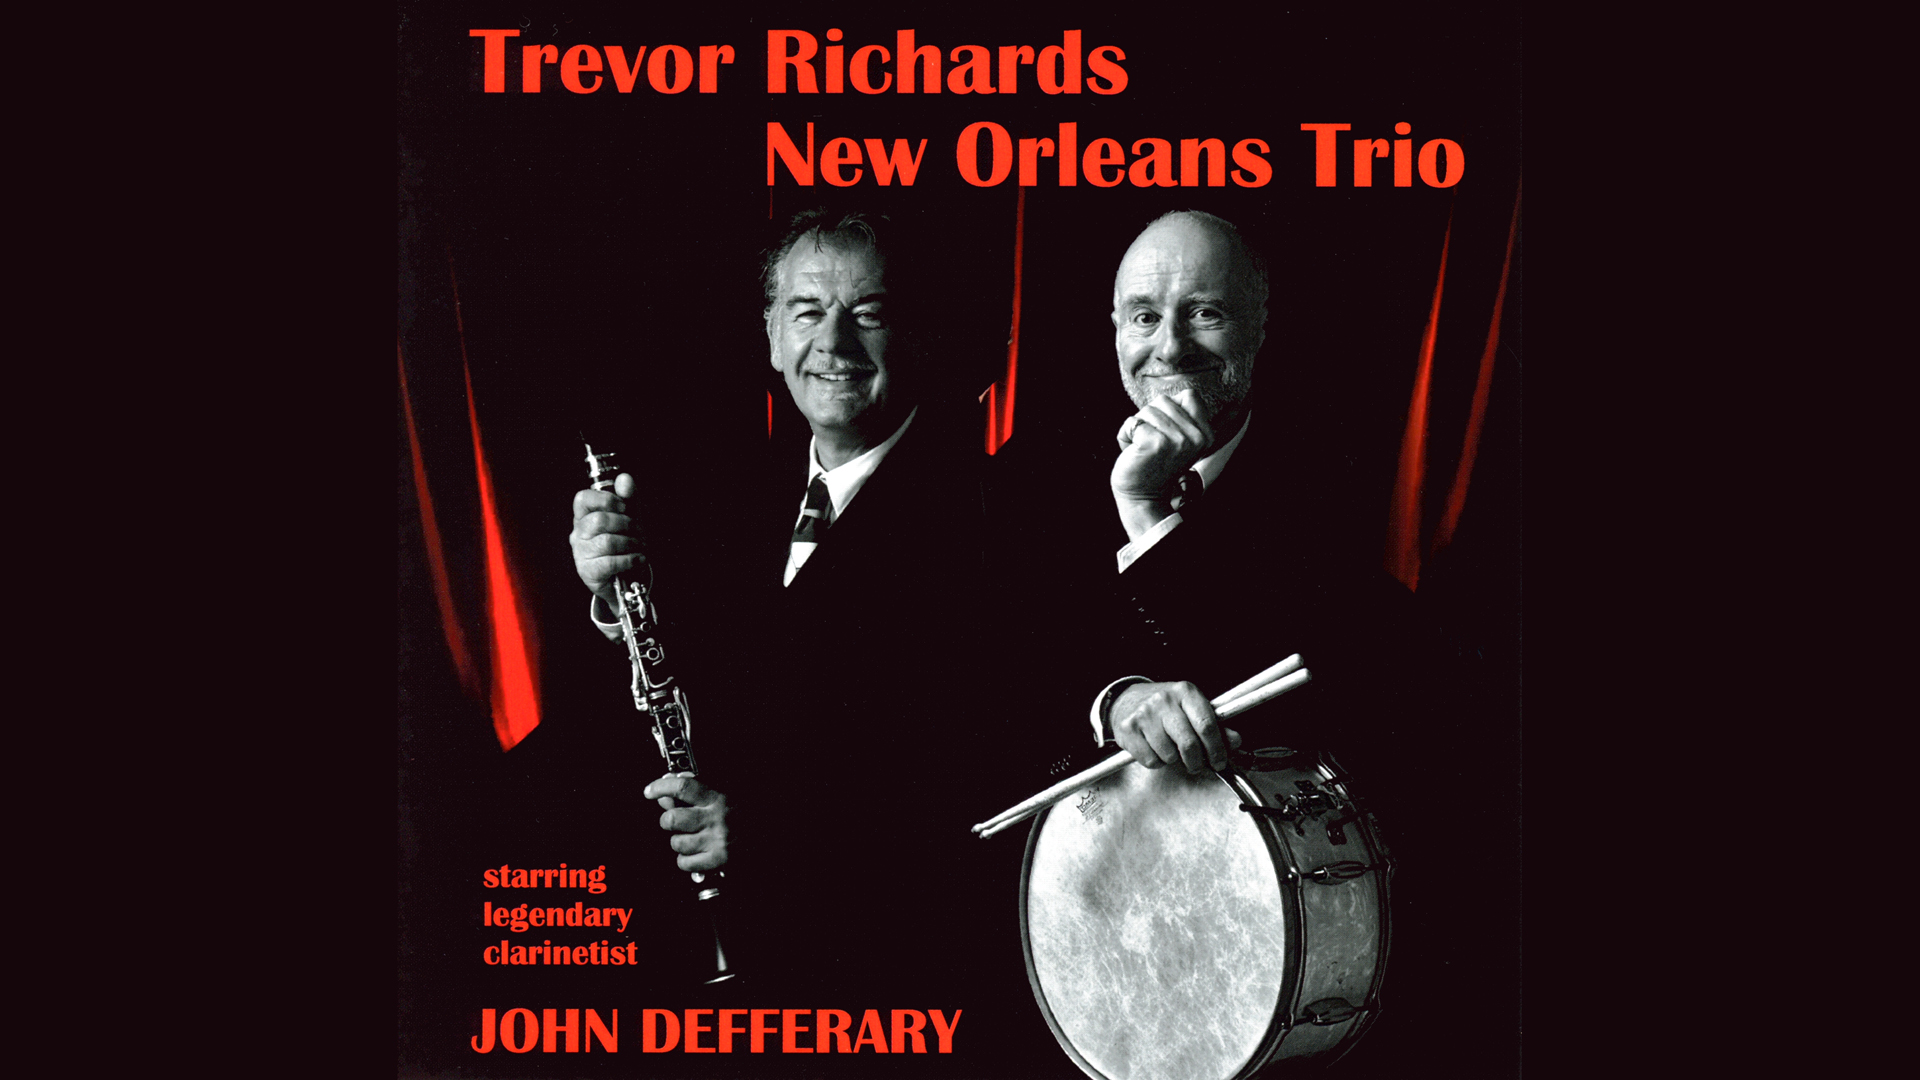 Publicity photo of the "Trevory Richards New Orleans Trio" with John Defferary holding a clarinet and Trevor Richards holding a drum and sticks